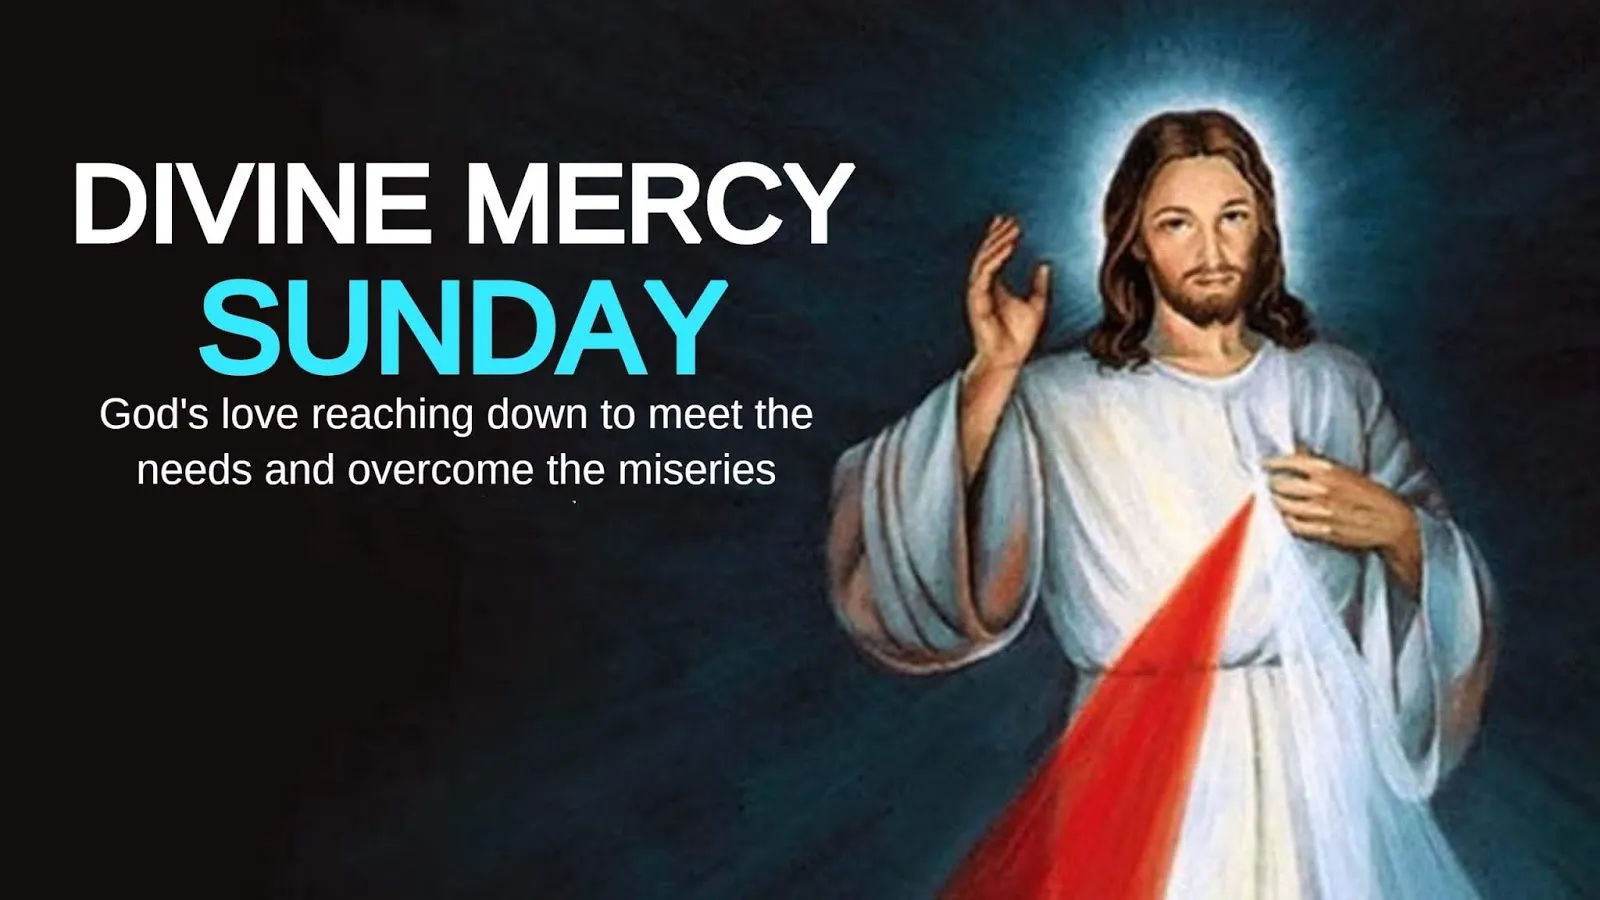 Prayer For Divine Mercy Sunday: Seeking Forgiveness and Redemption